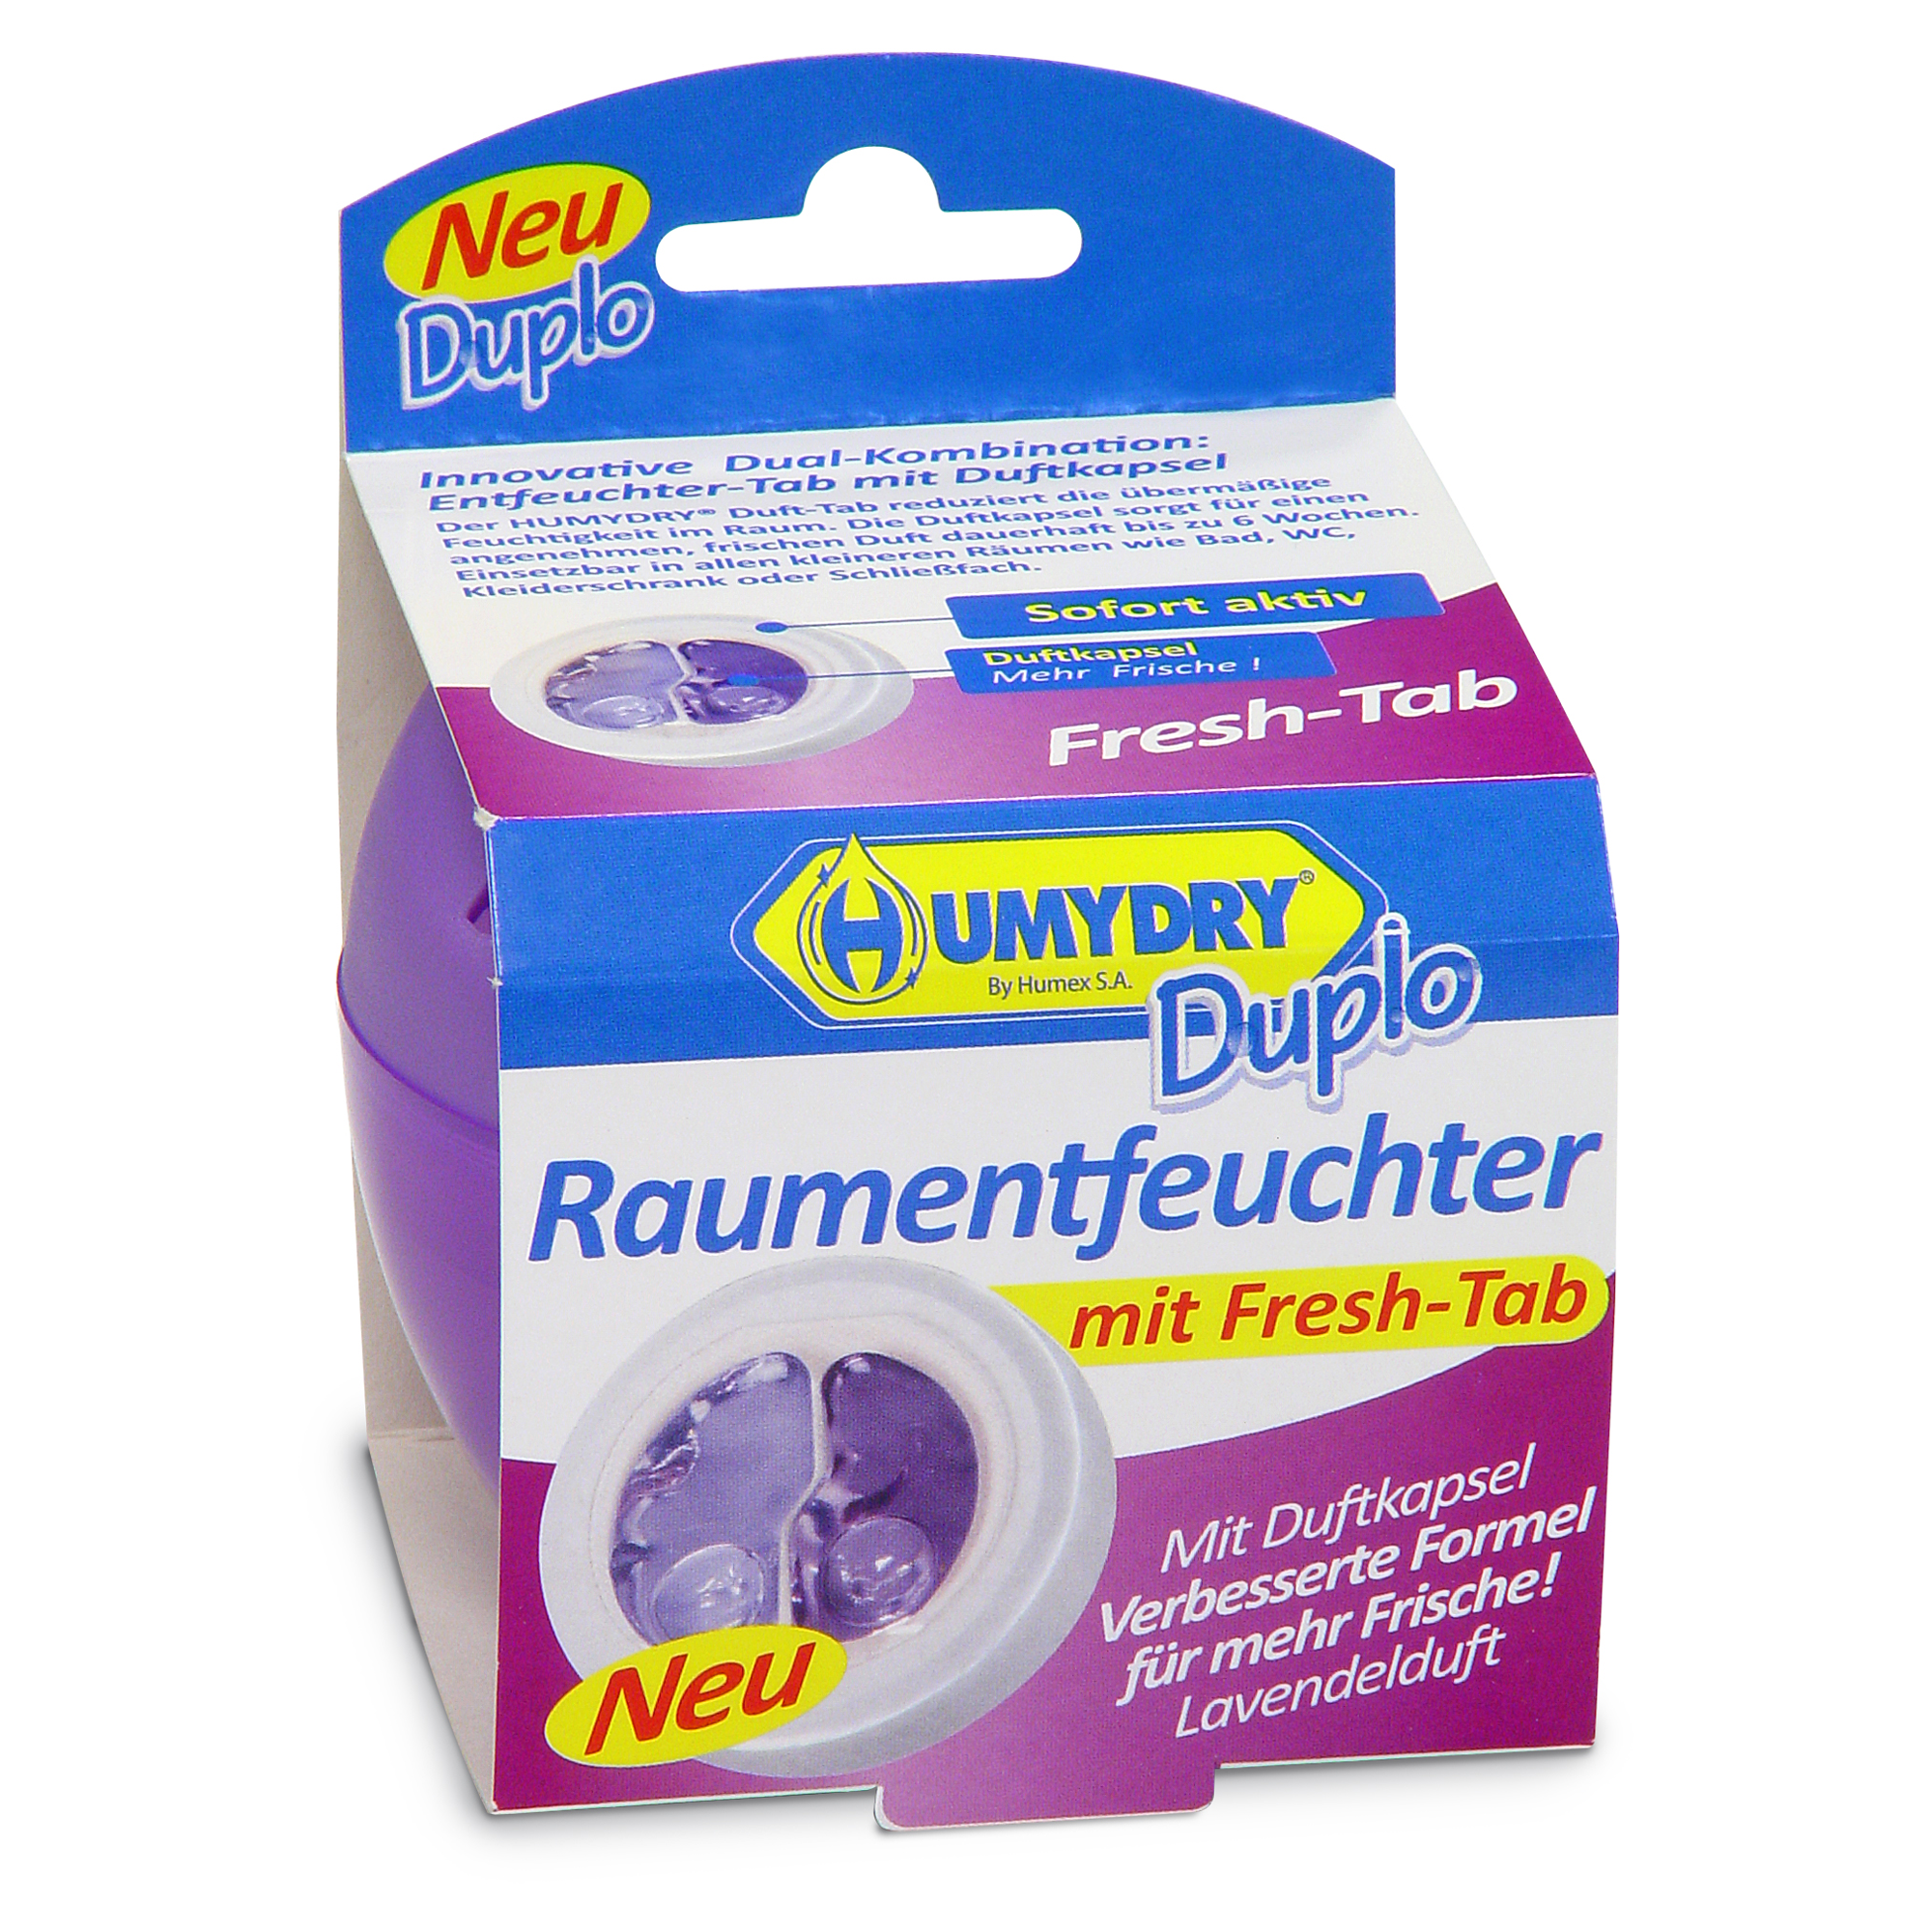 Raumentfeuchter "Duplo" Lavendel 75 g + product picture